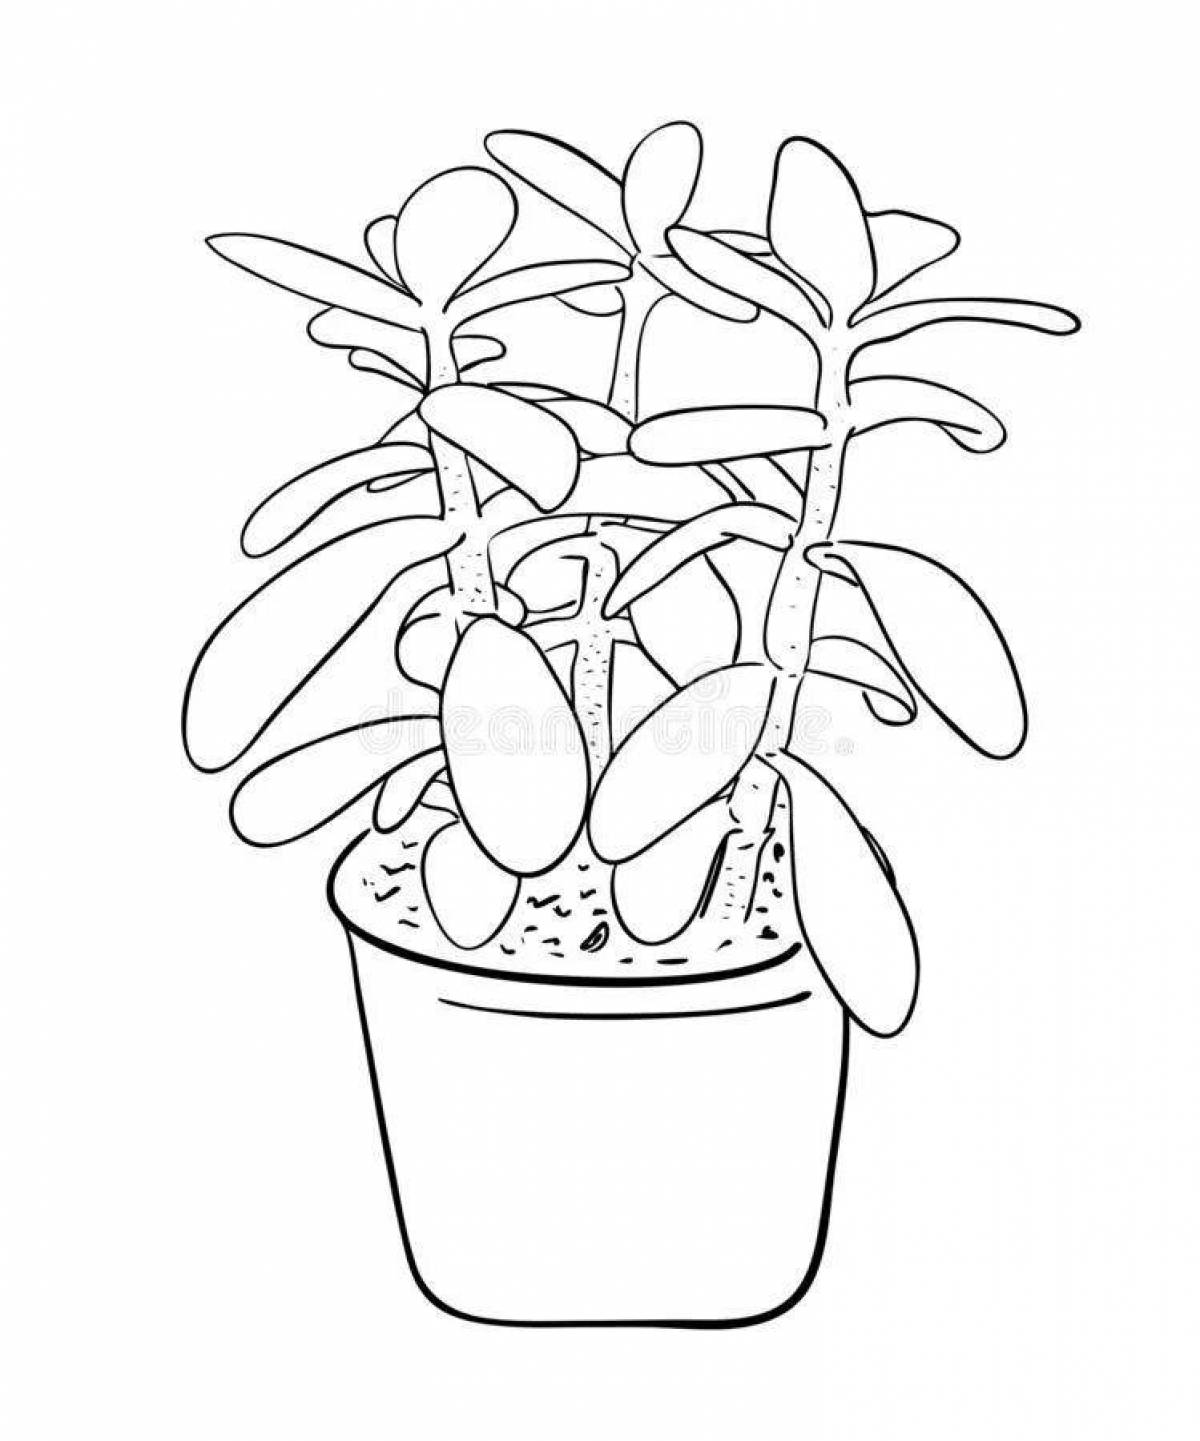 Playful houseplant coloring for kids